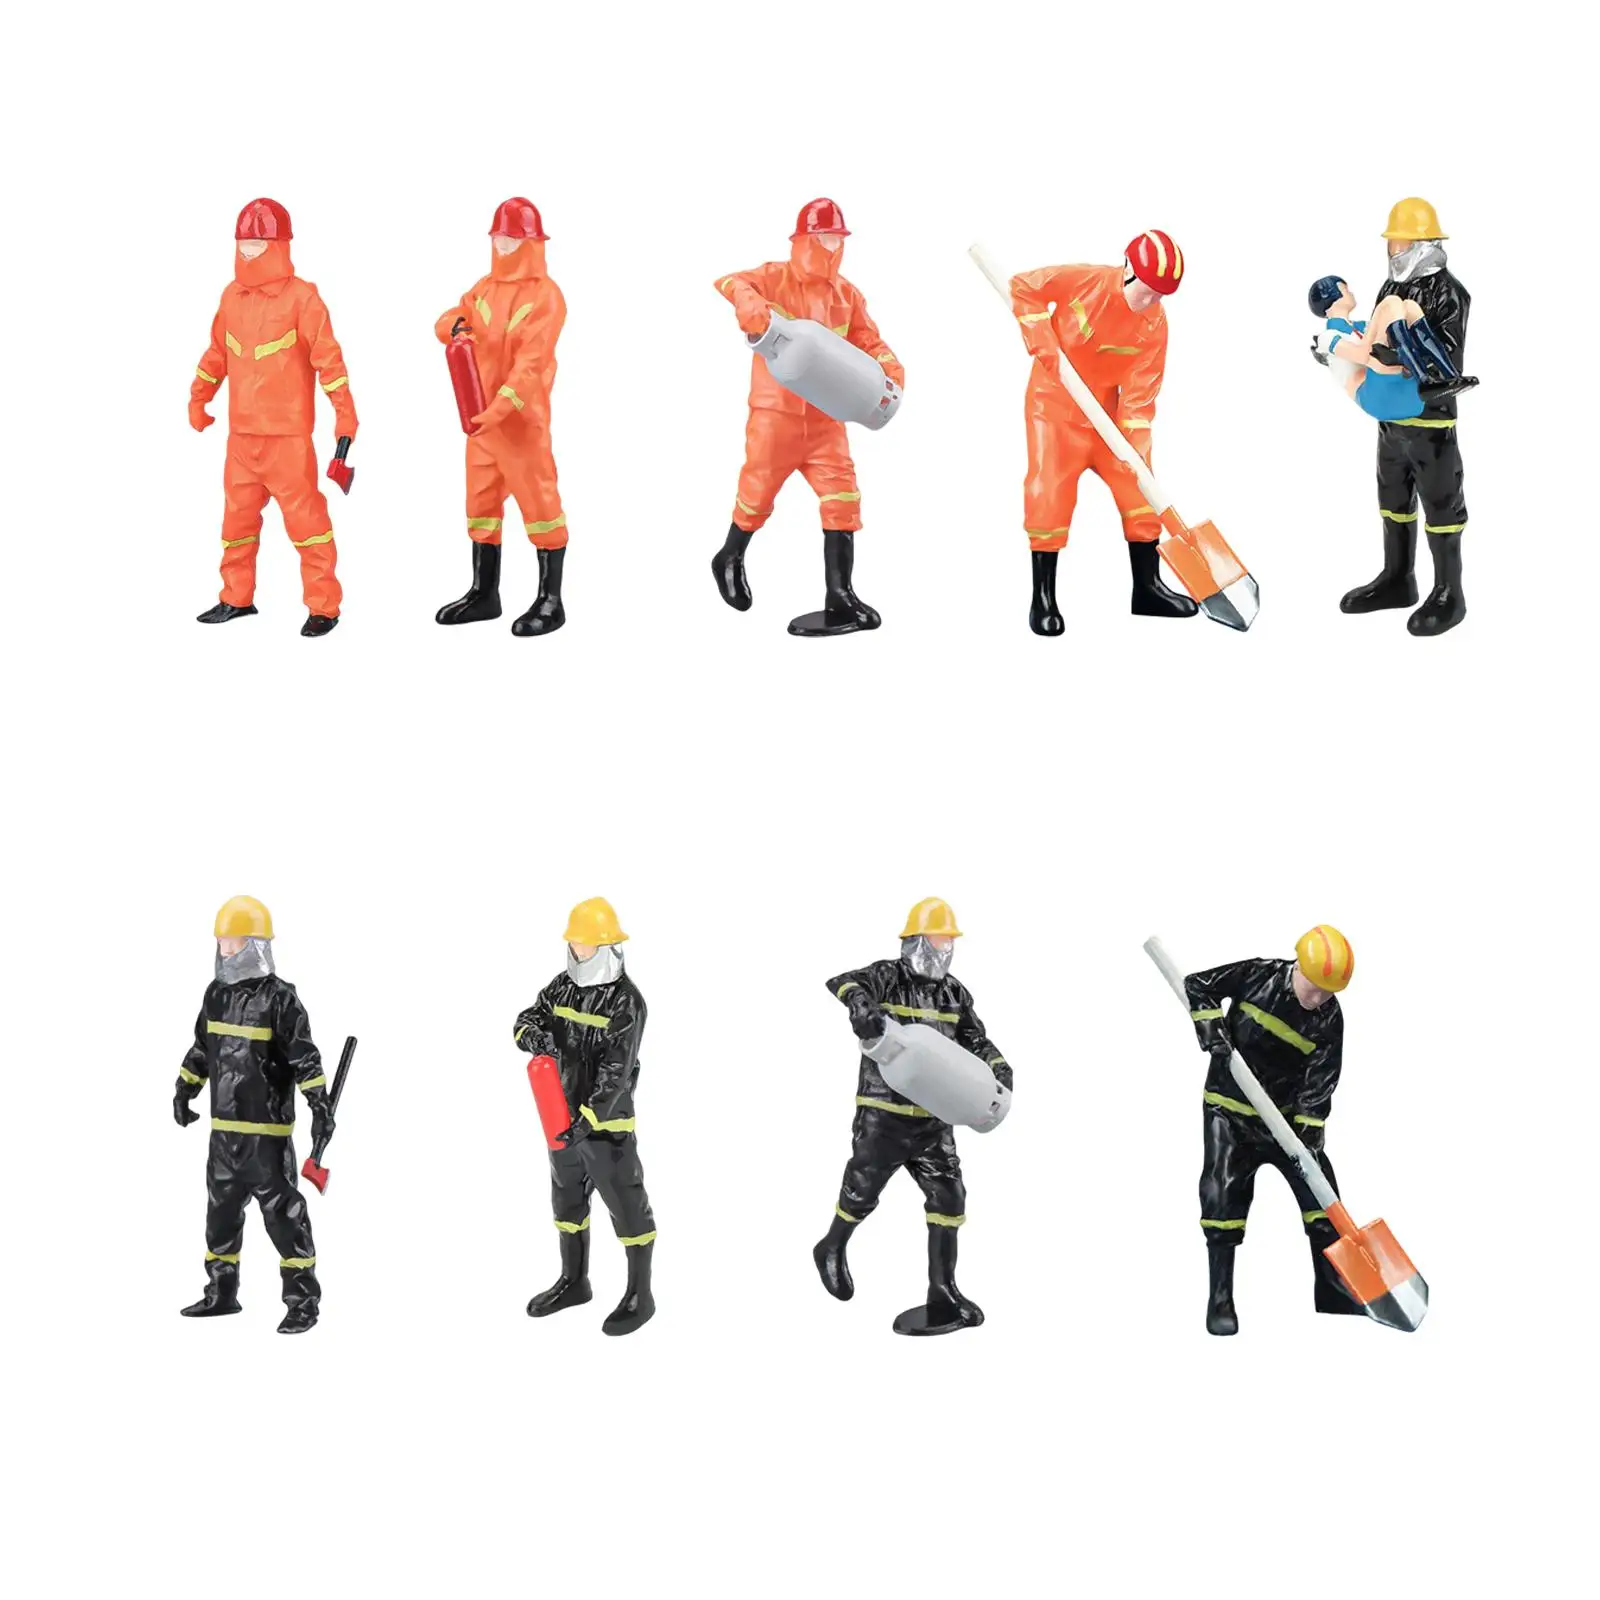 1/32 Scale Models Figurine Miniature People Model ,Fireman Figures for Layout